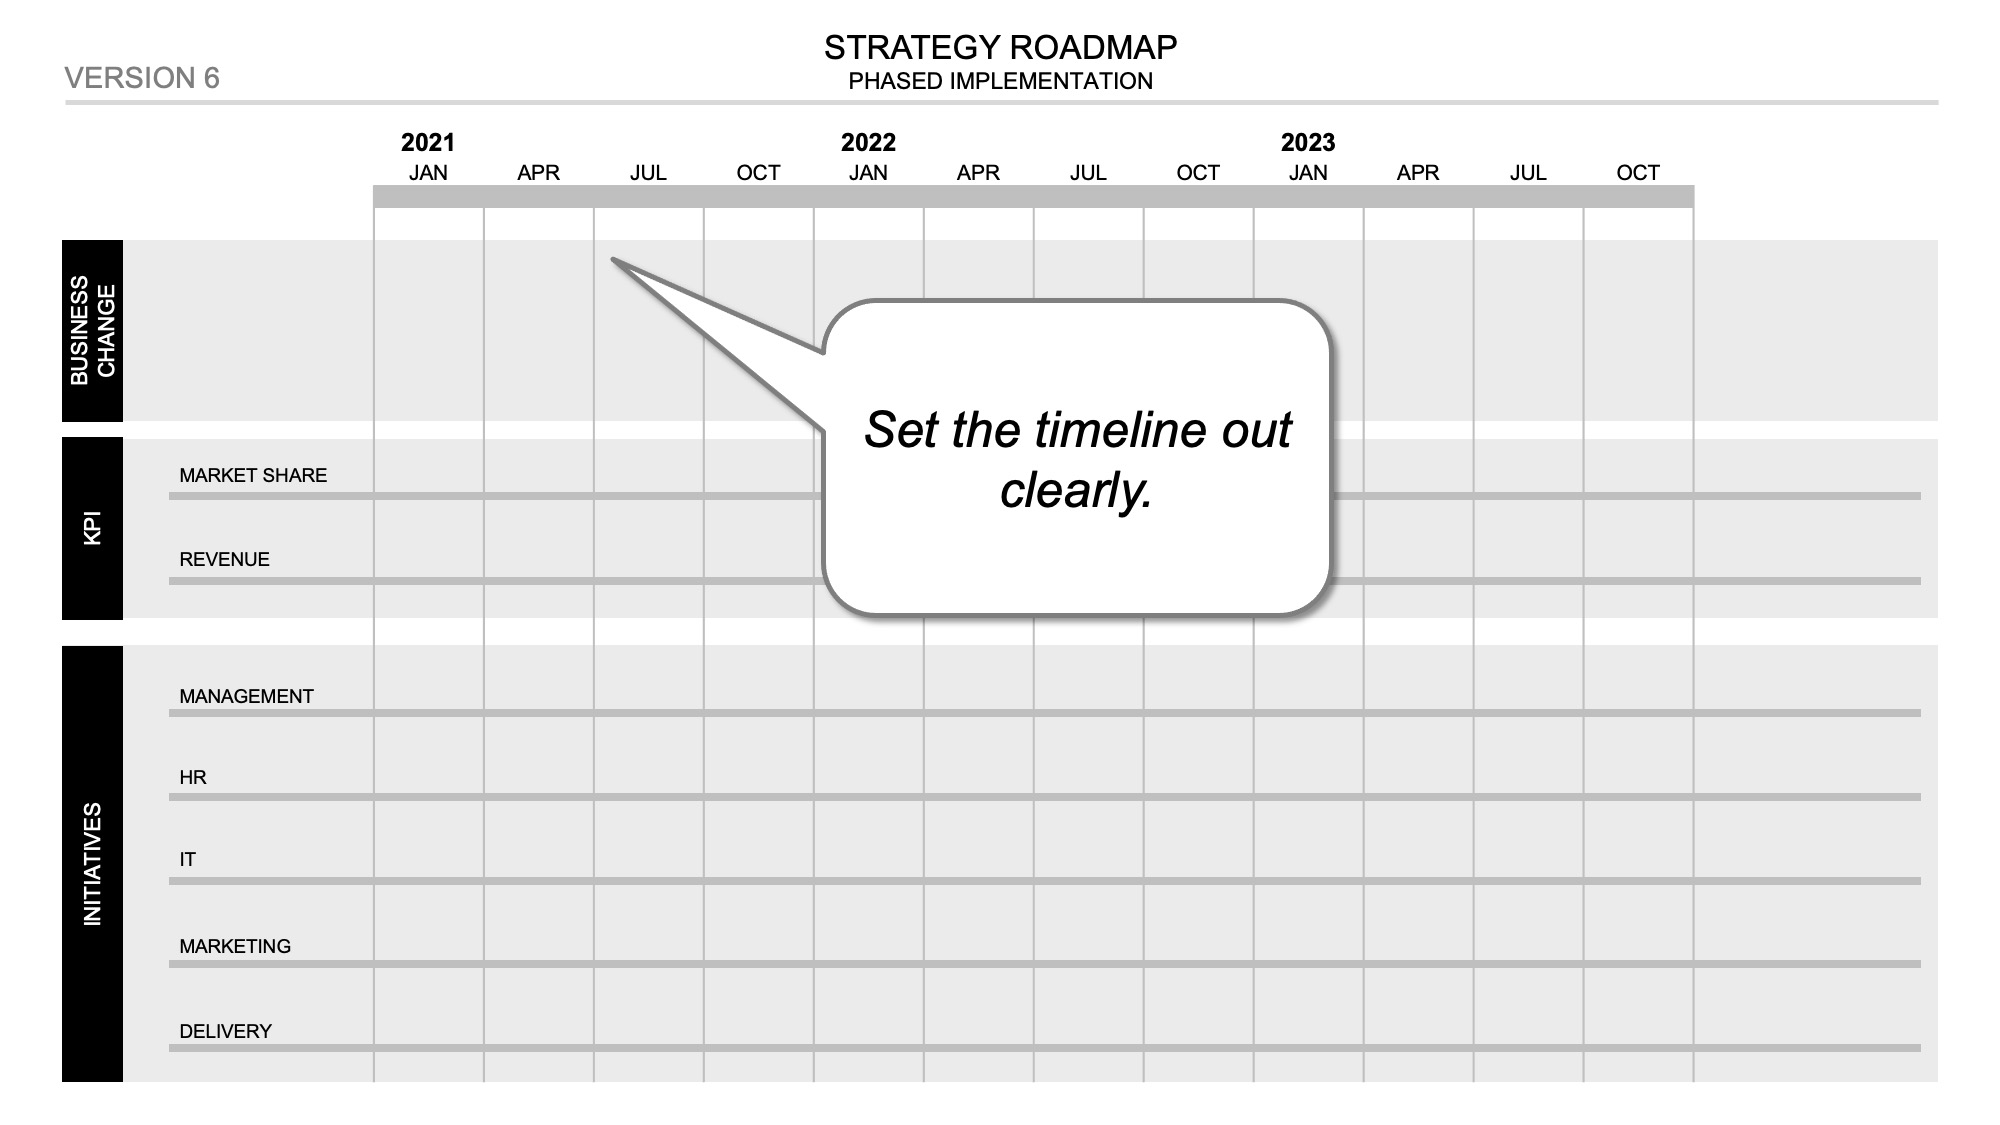 Step 4: Add your timeline to clearly show the duration and phasing